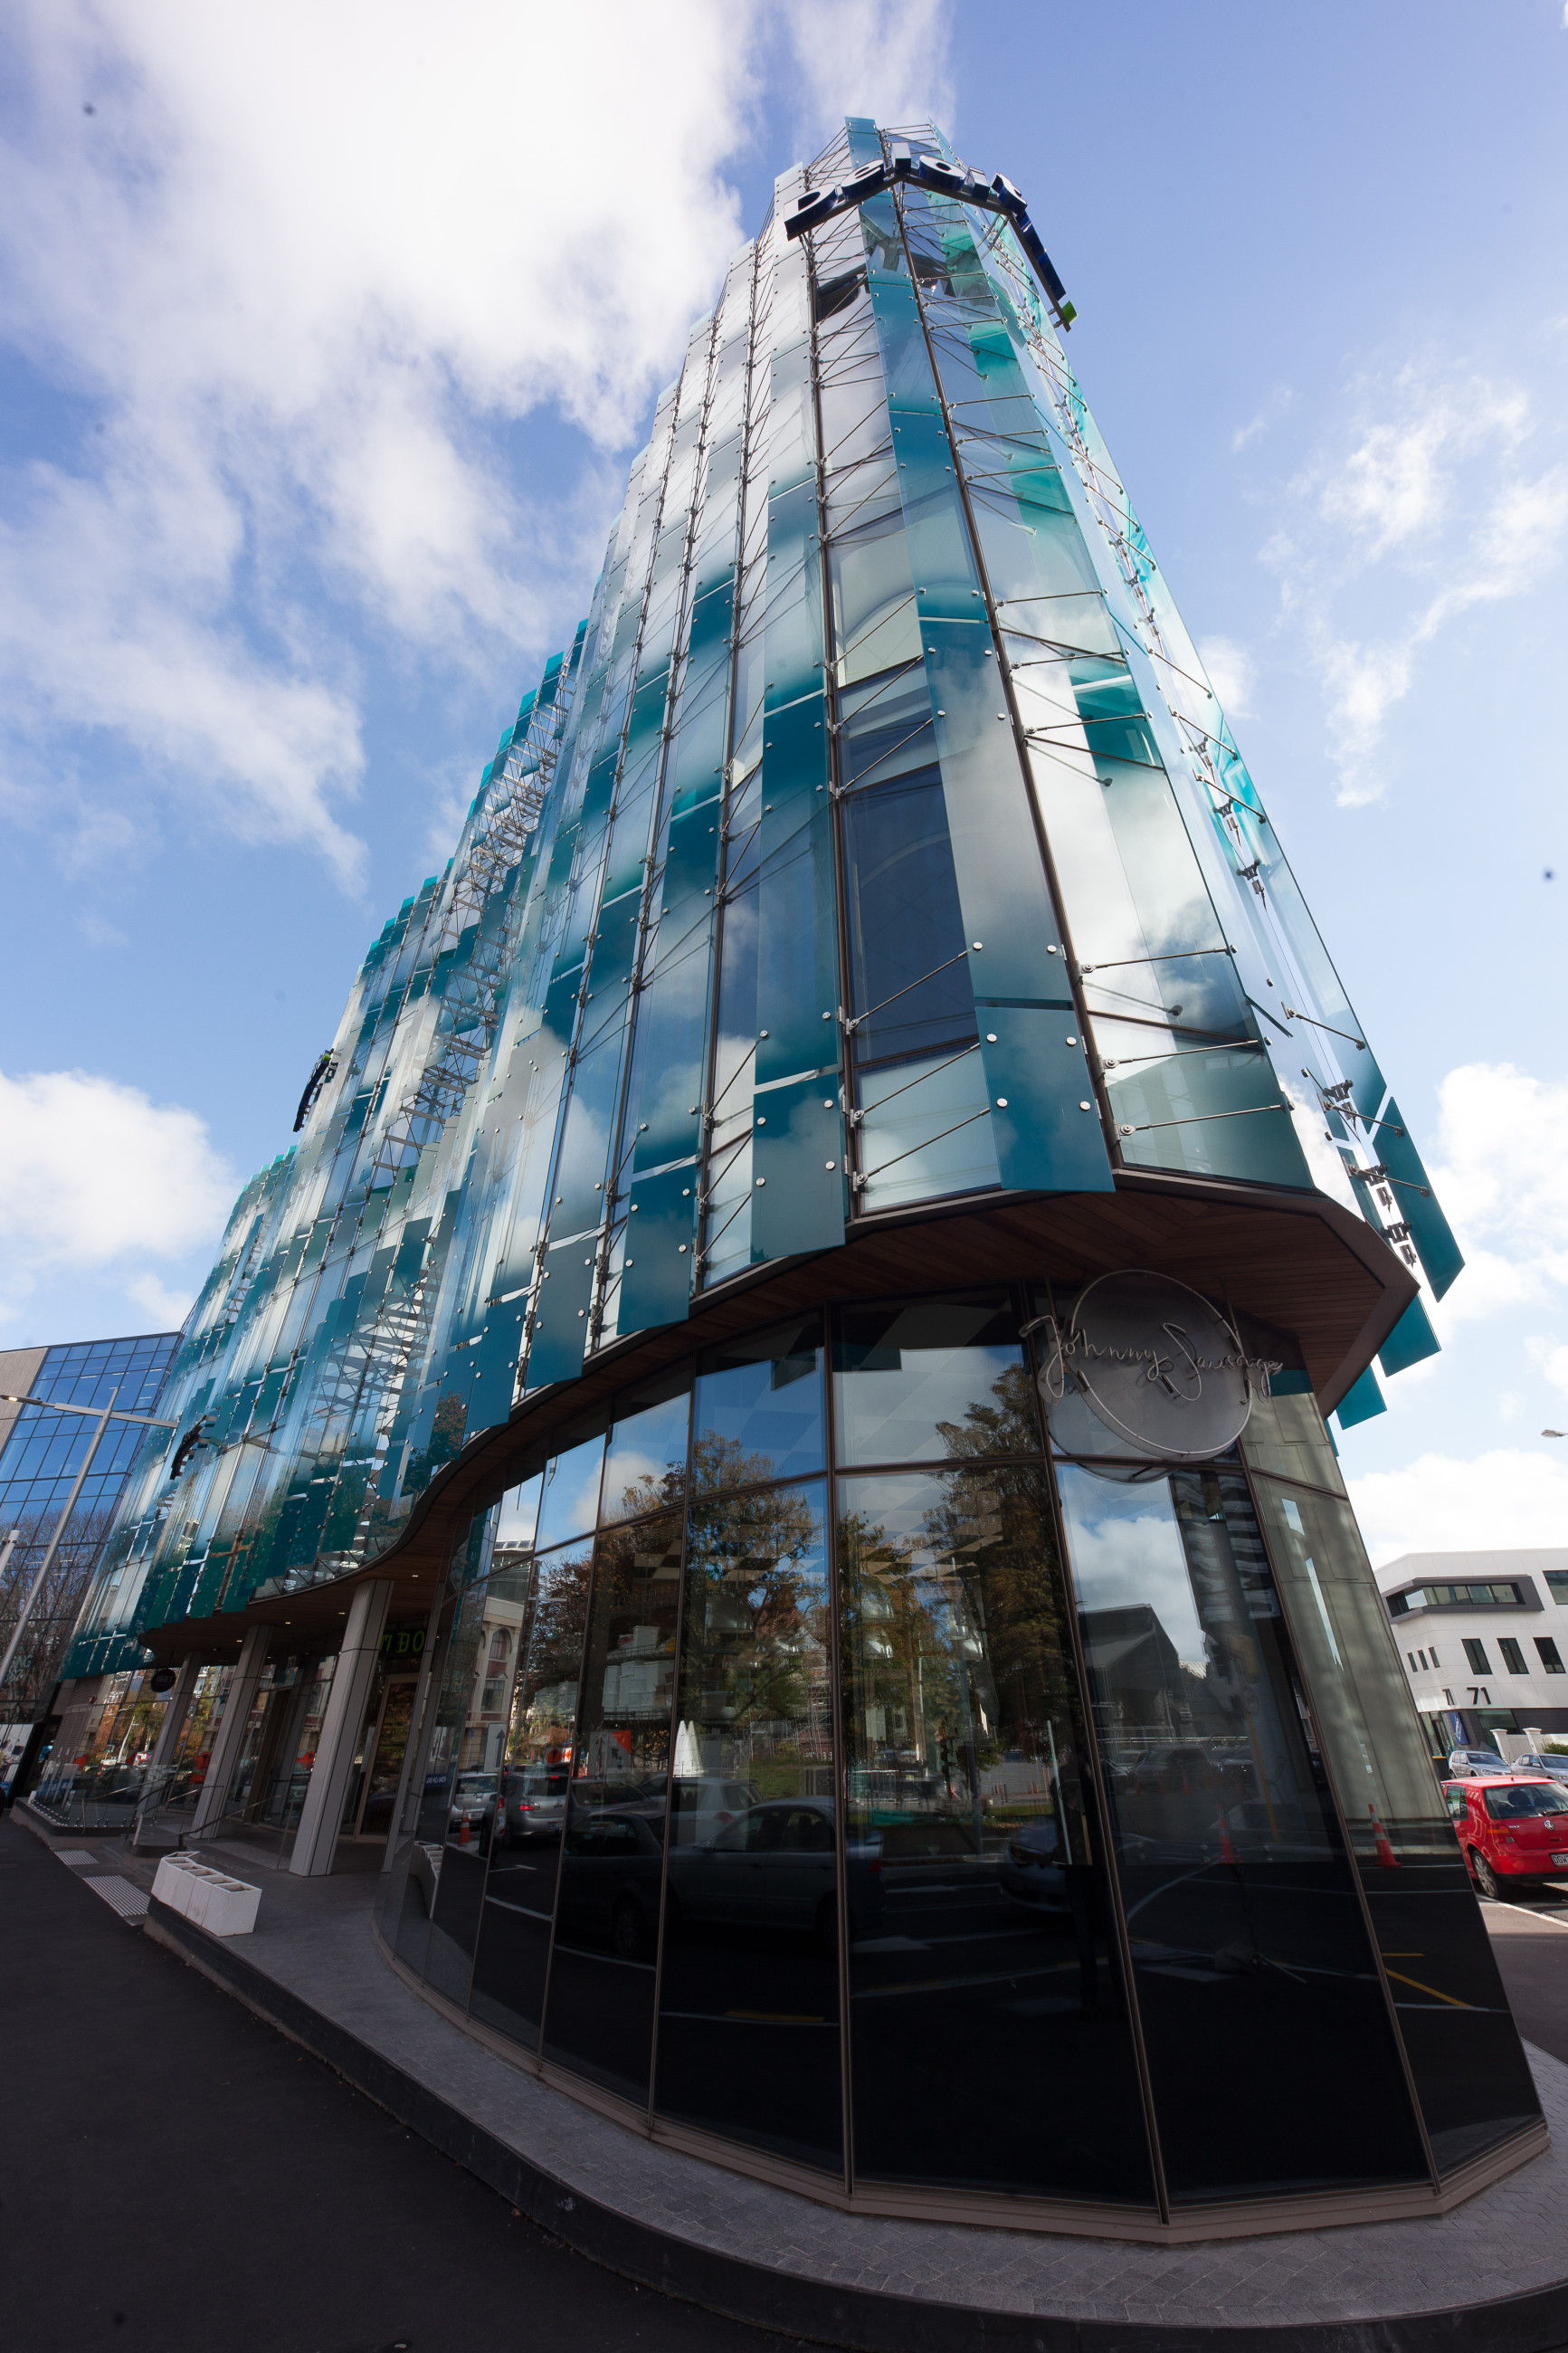 Architectural structure with glass facade and highlighted features with a blue sky